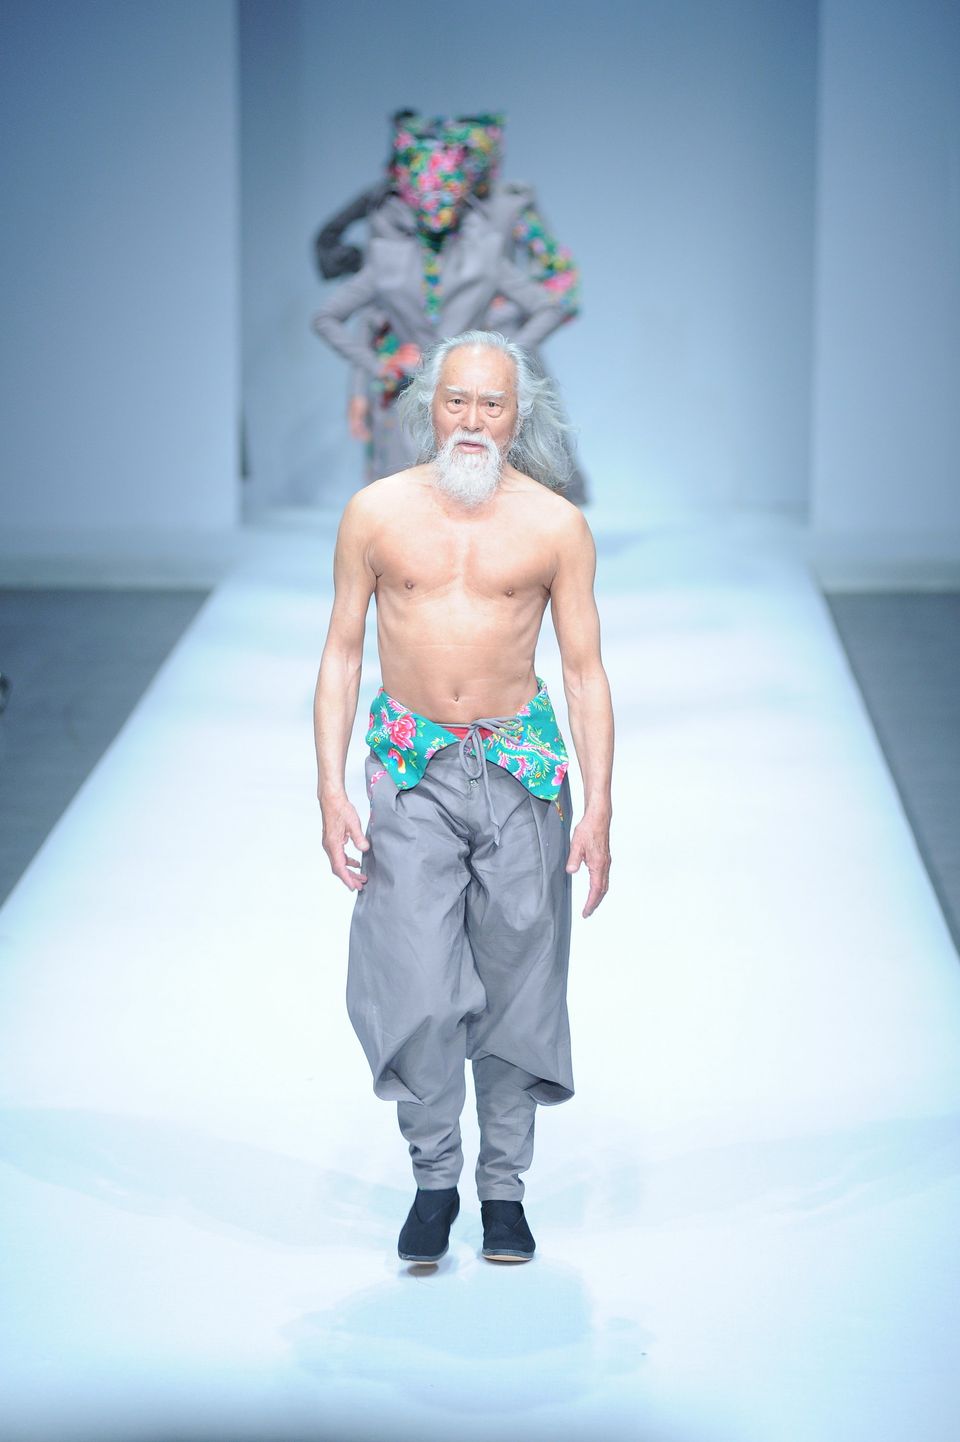 80 Year Old Model Crushes Stereotypes With His Runway Swagger 5152